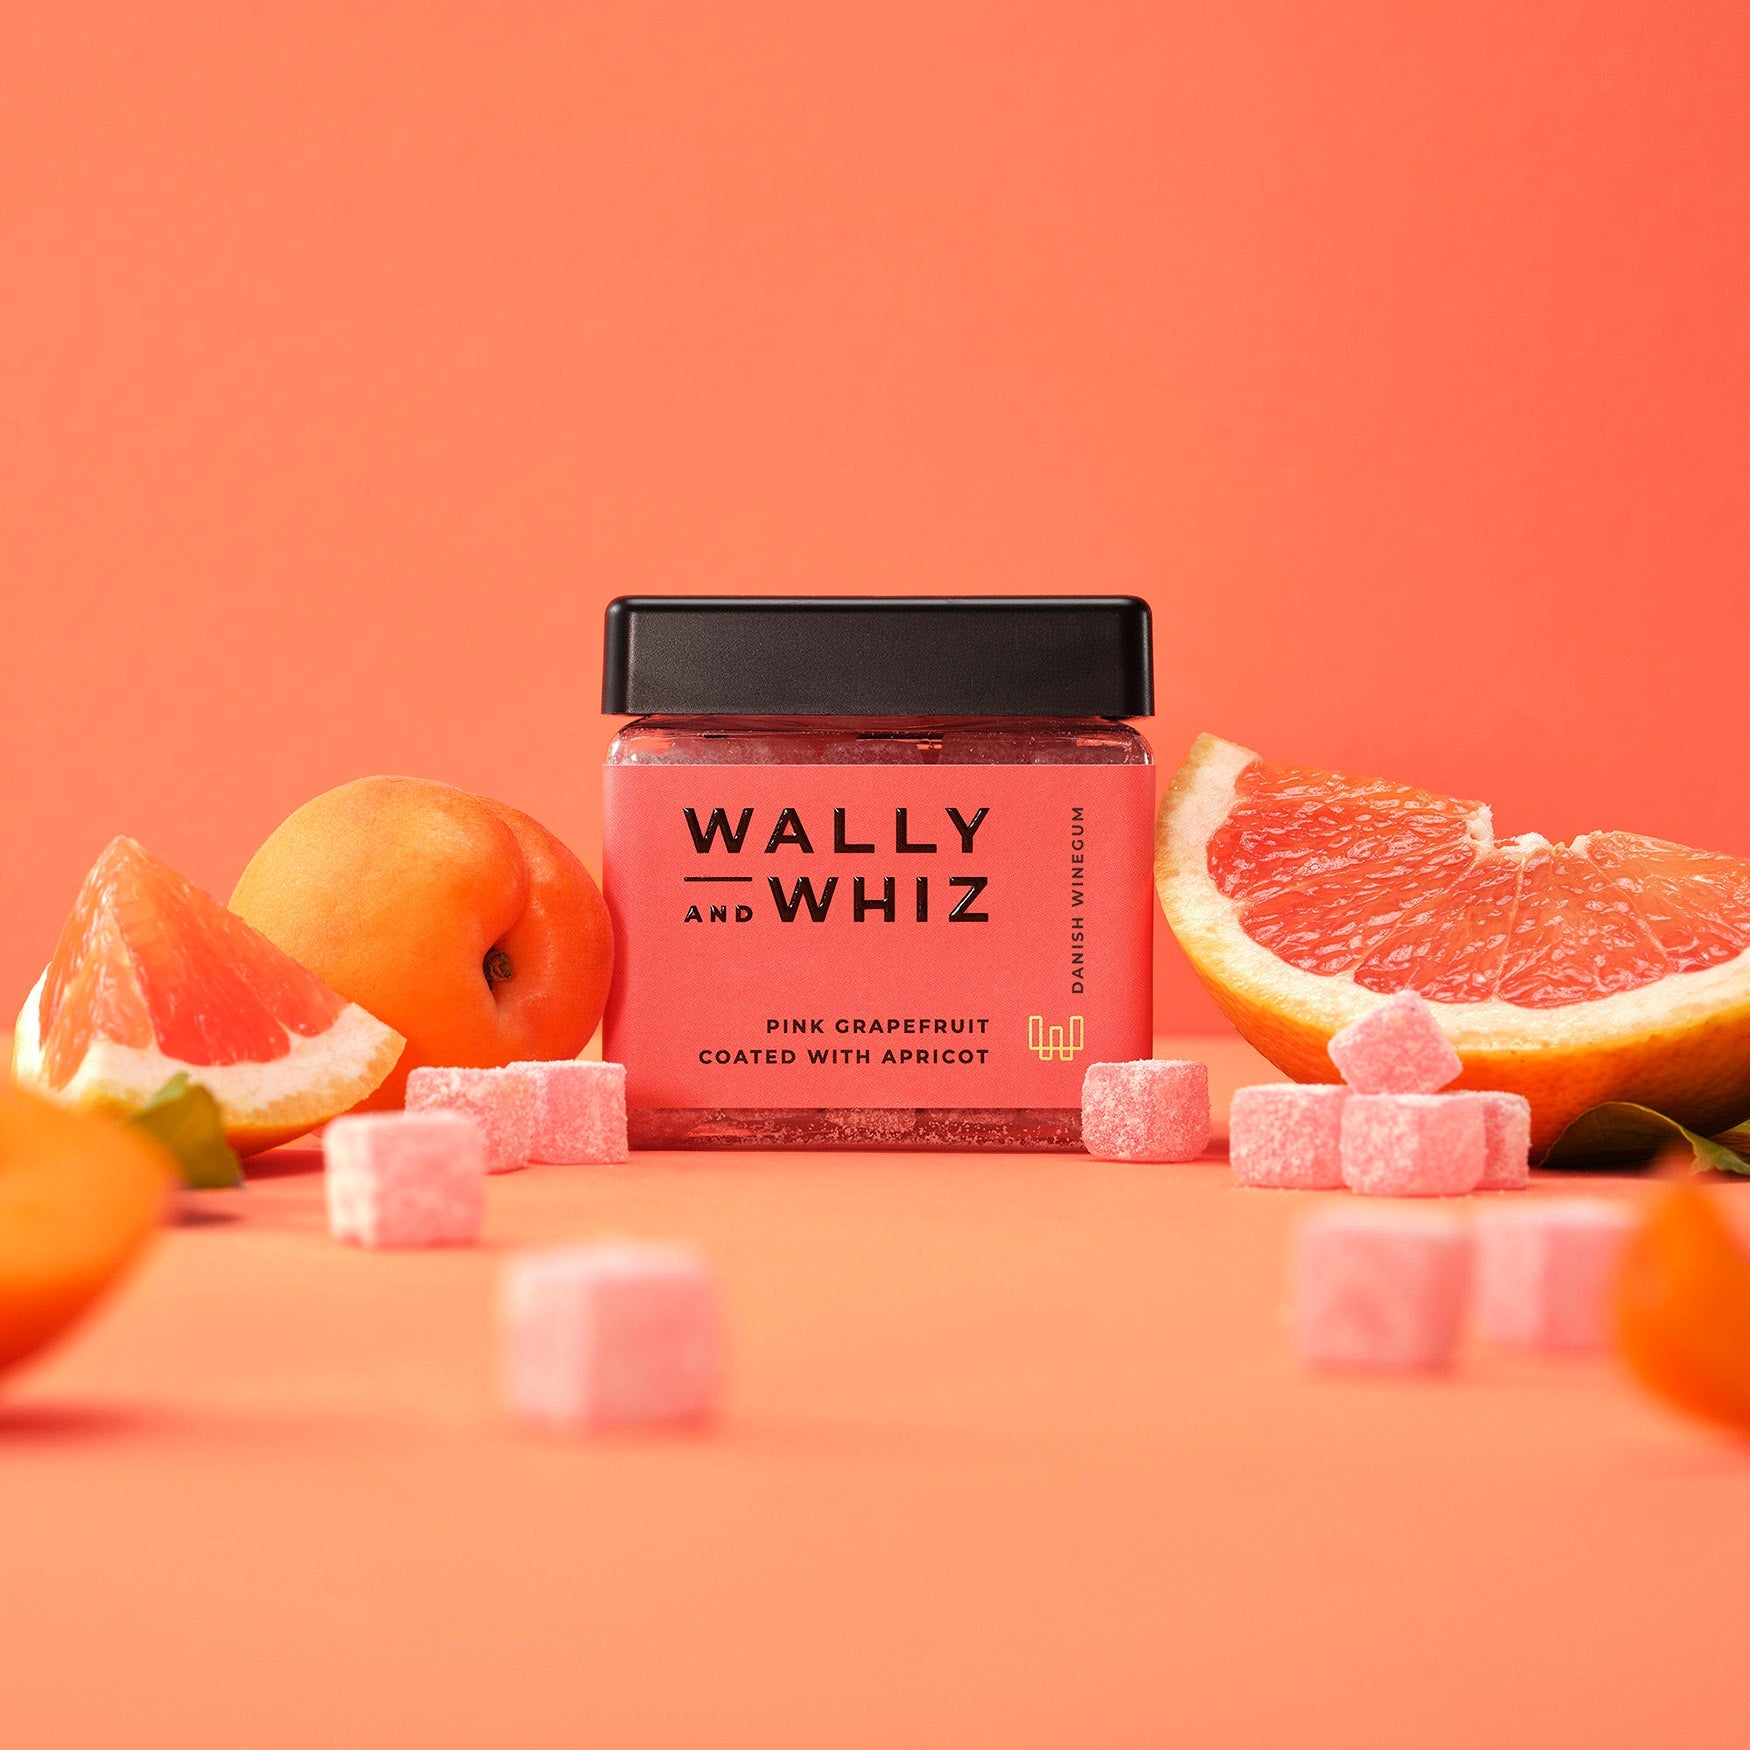 Pink grapefruit with apricot, 140g